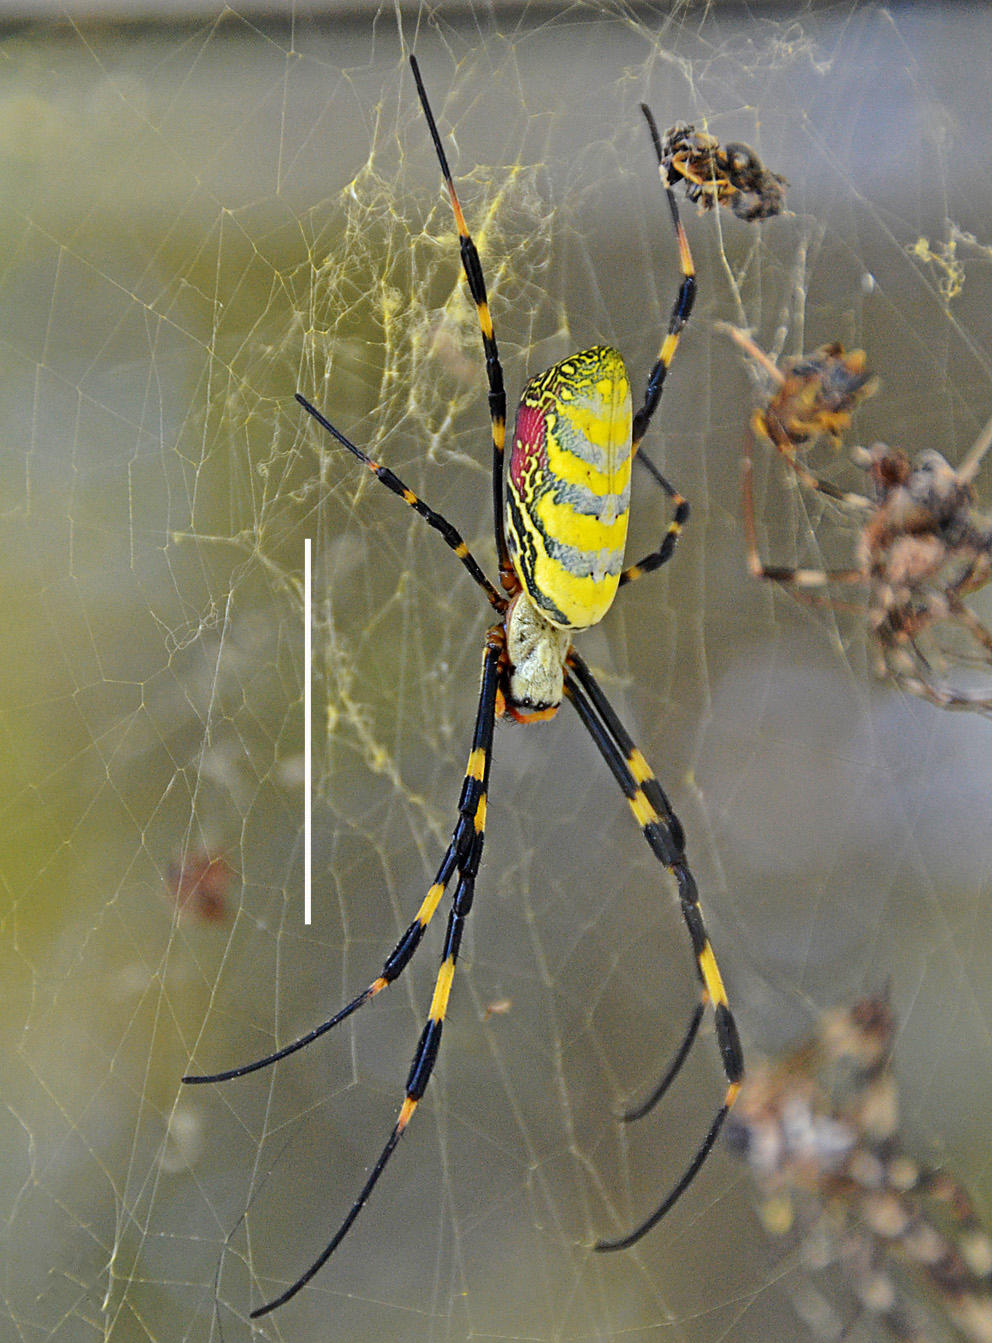 Joro spider is rapidly spreading in the U.S. They're not after you.